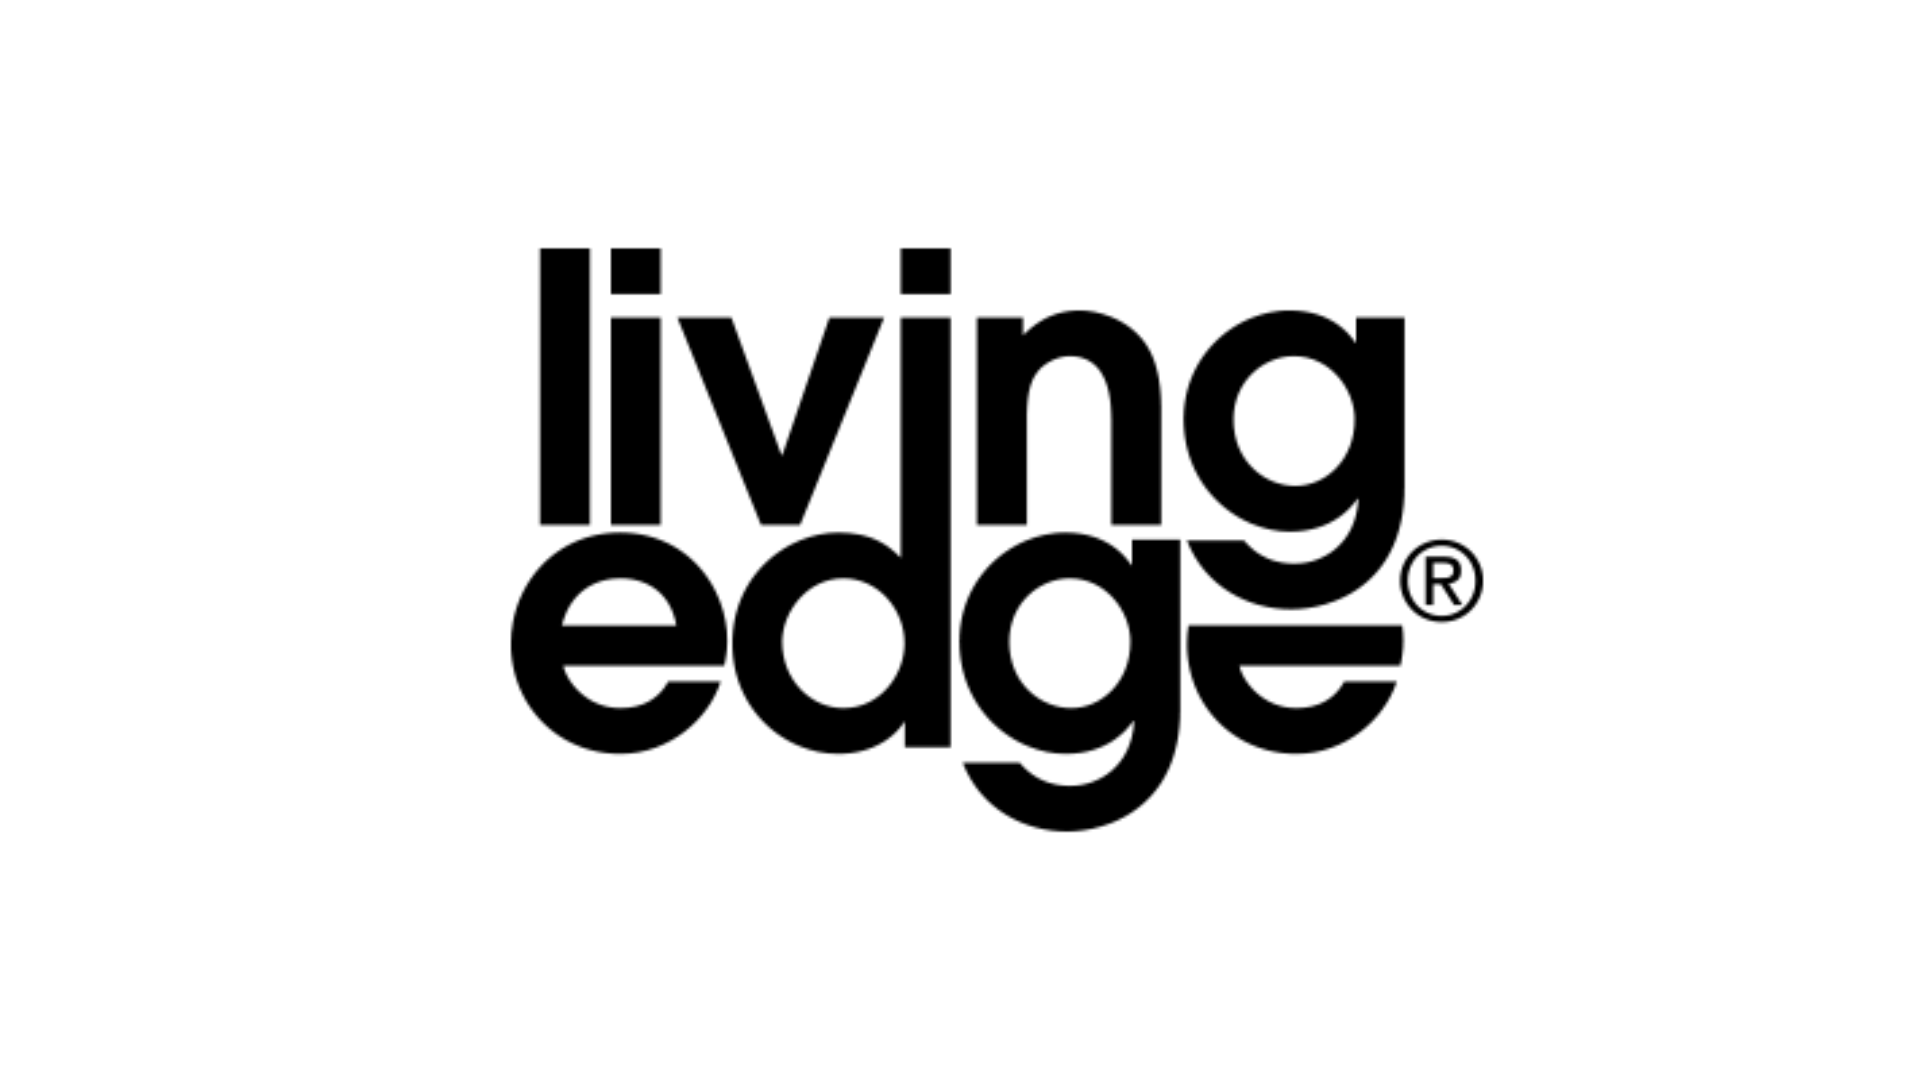 Get the Luxe Noir style with Living Edge